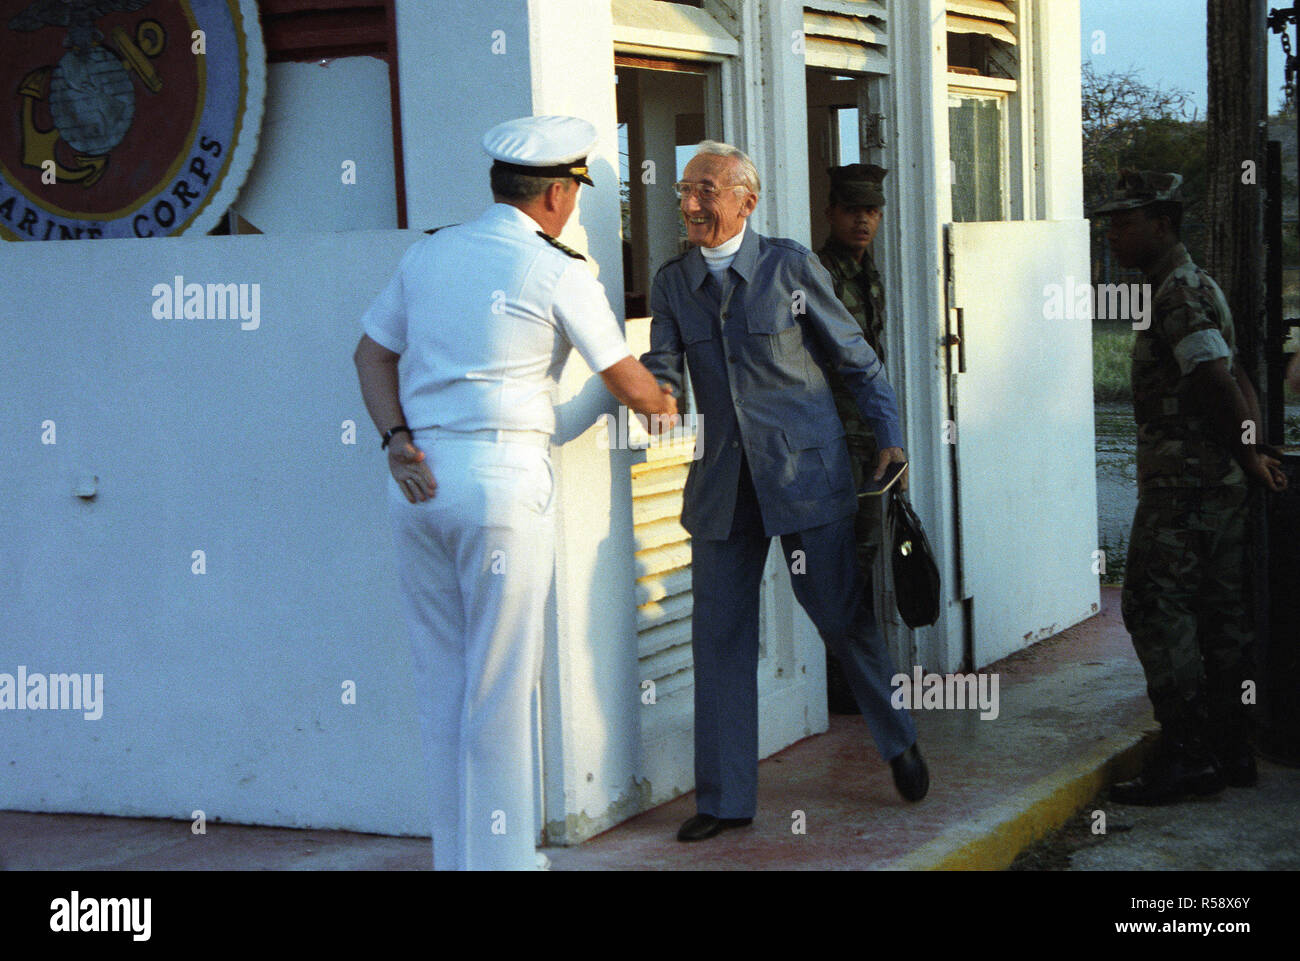 Explorer Jacques Cousteau is greeted by a US Navy officer after passing through the northeast gate separating communist Cuba and the US naval base.  Cousteau is studying the ecology in the waters surrounding the island. Stock Photo